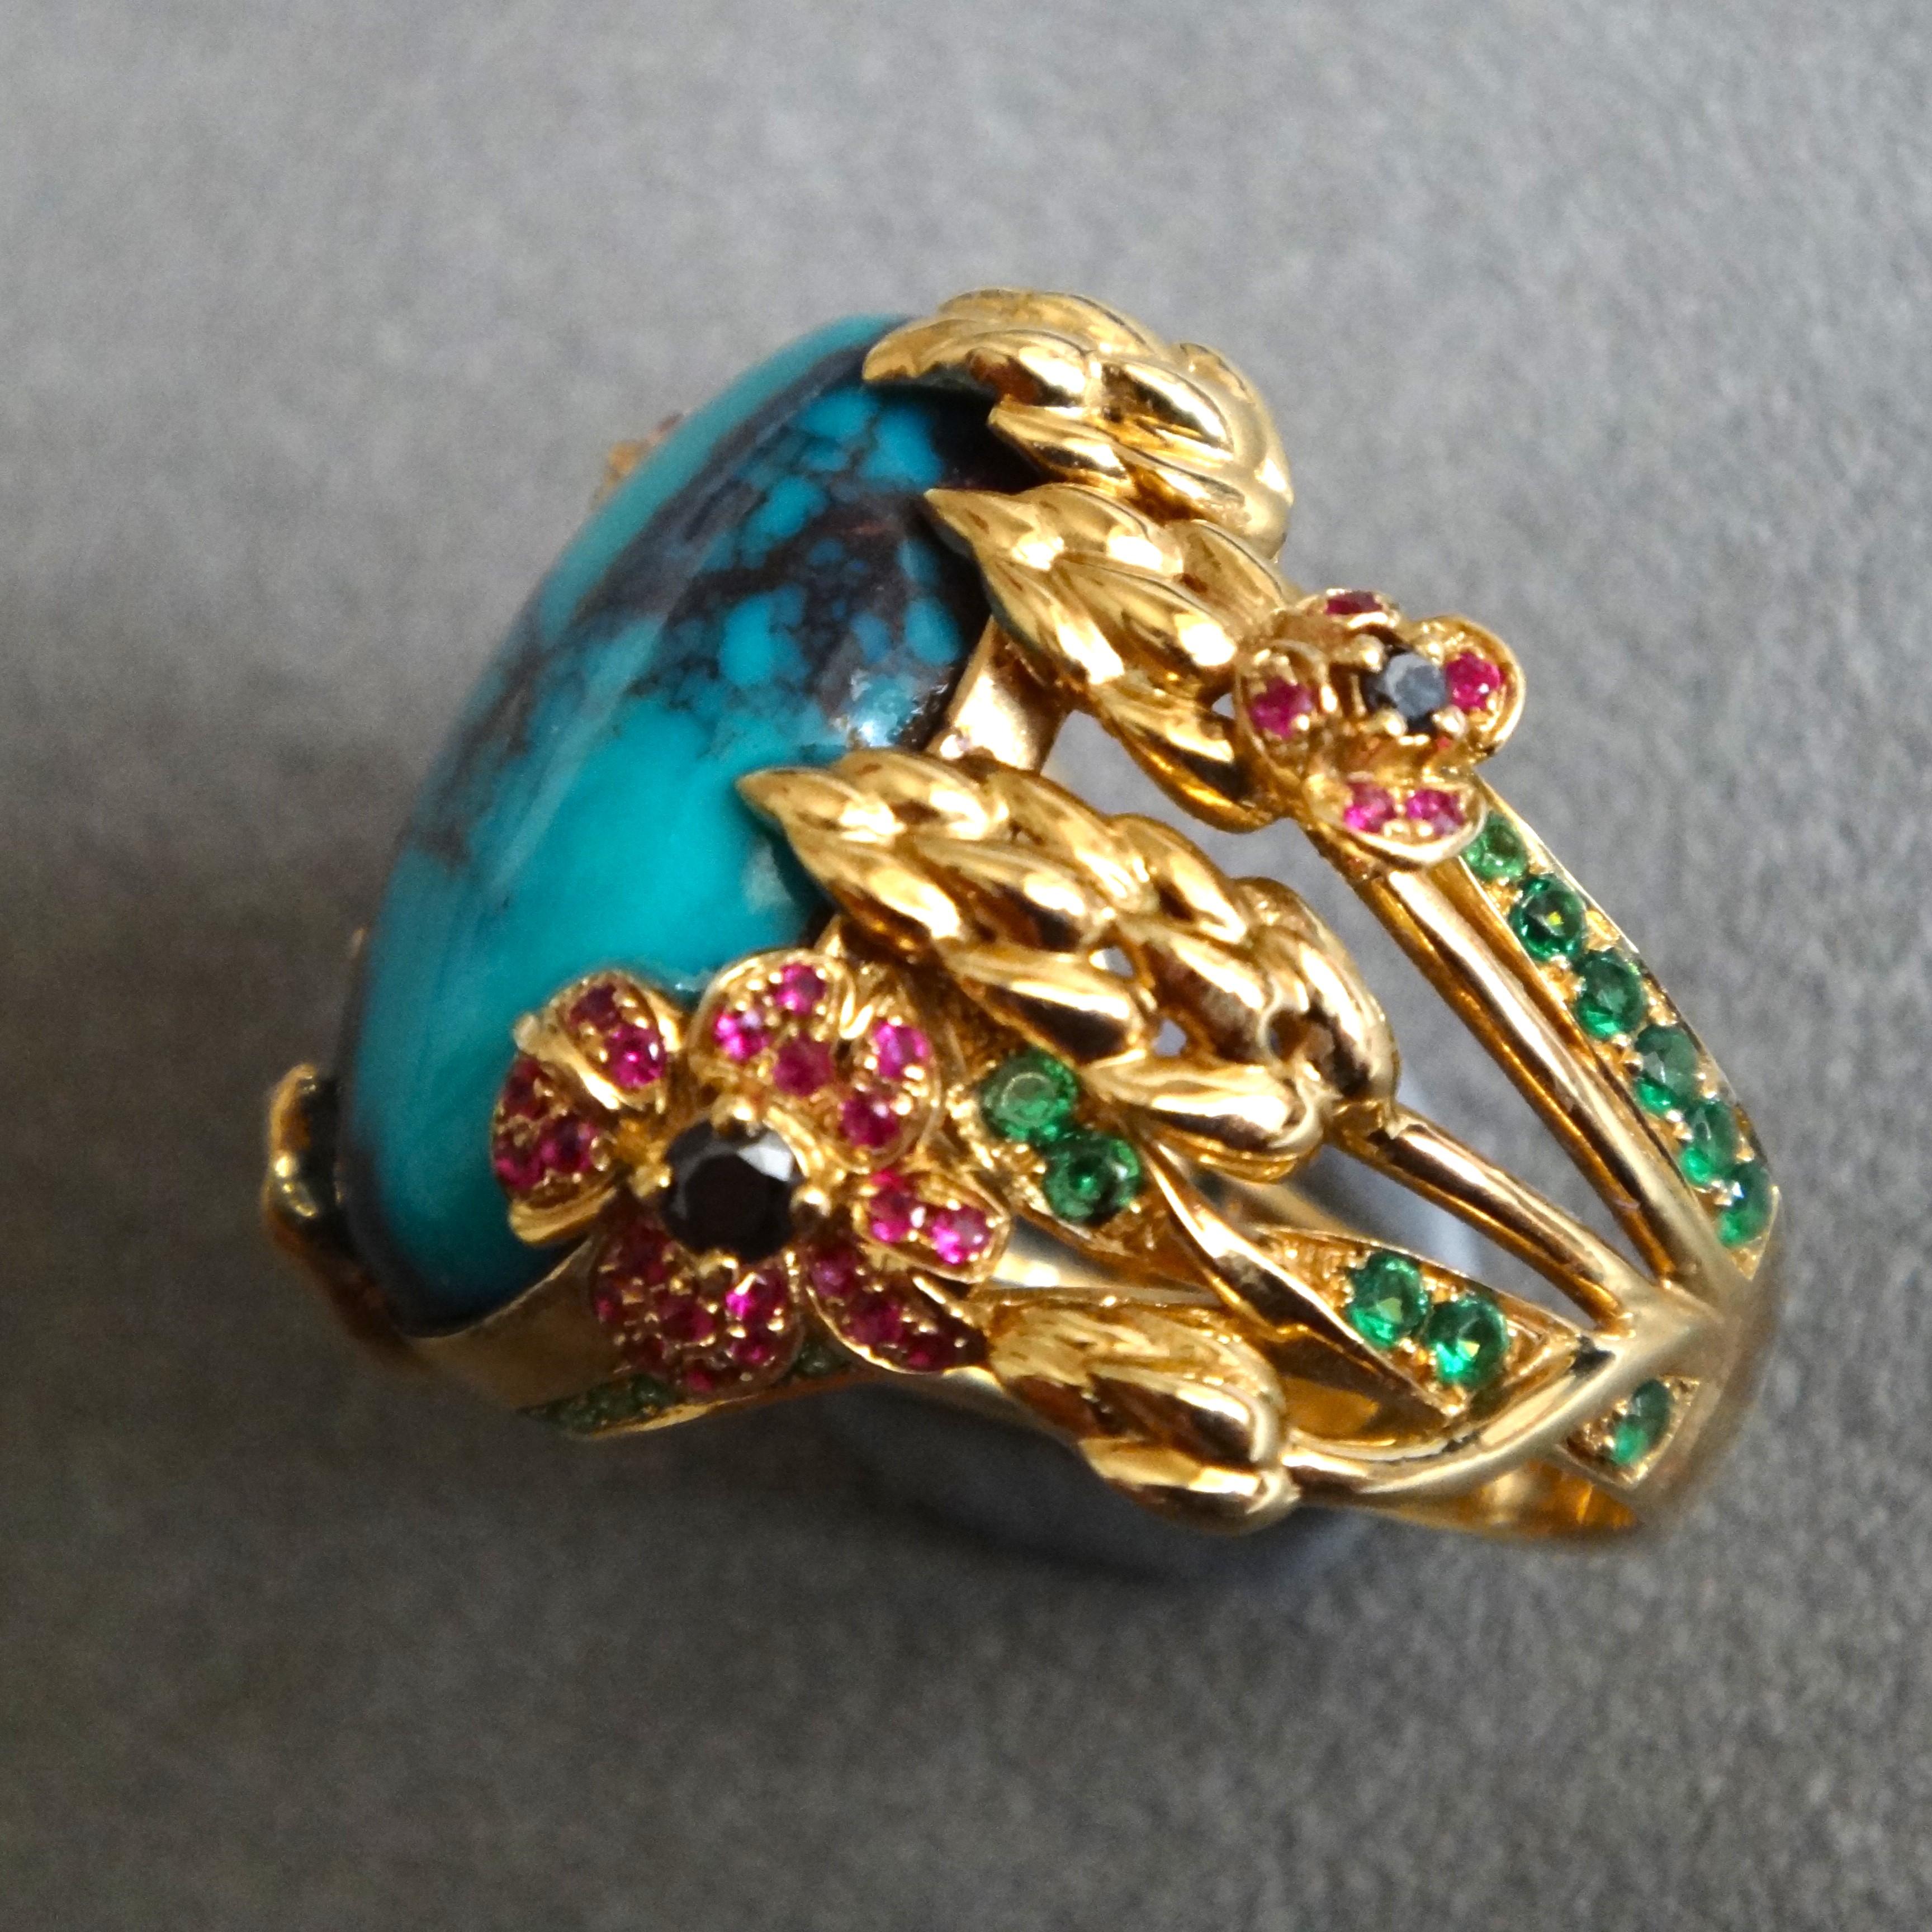 21Carat Natural Bisbee Turquoise 18K Gold Ruby and Tsavorite Cocktail Ring For Sale 4